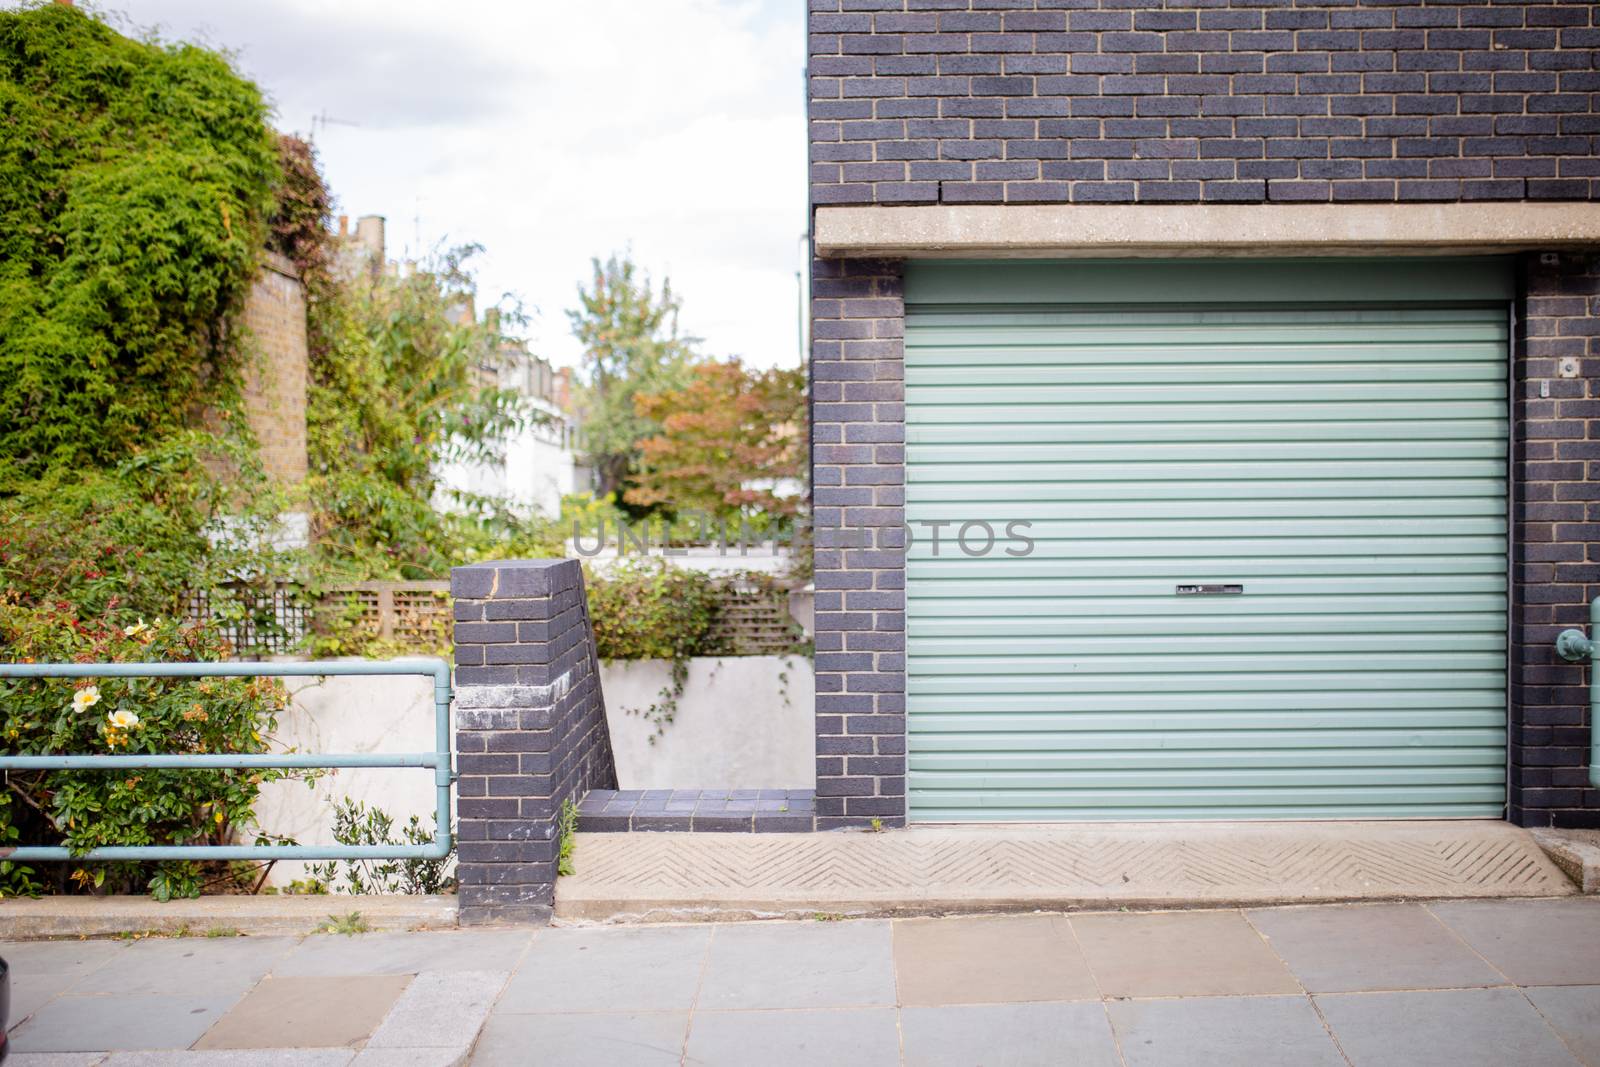 Landscape View of the Garage Door of a Dark Colour Brick Building with trees in the background and from London, UK